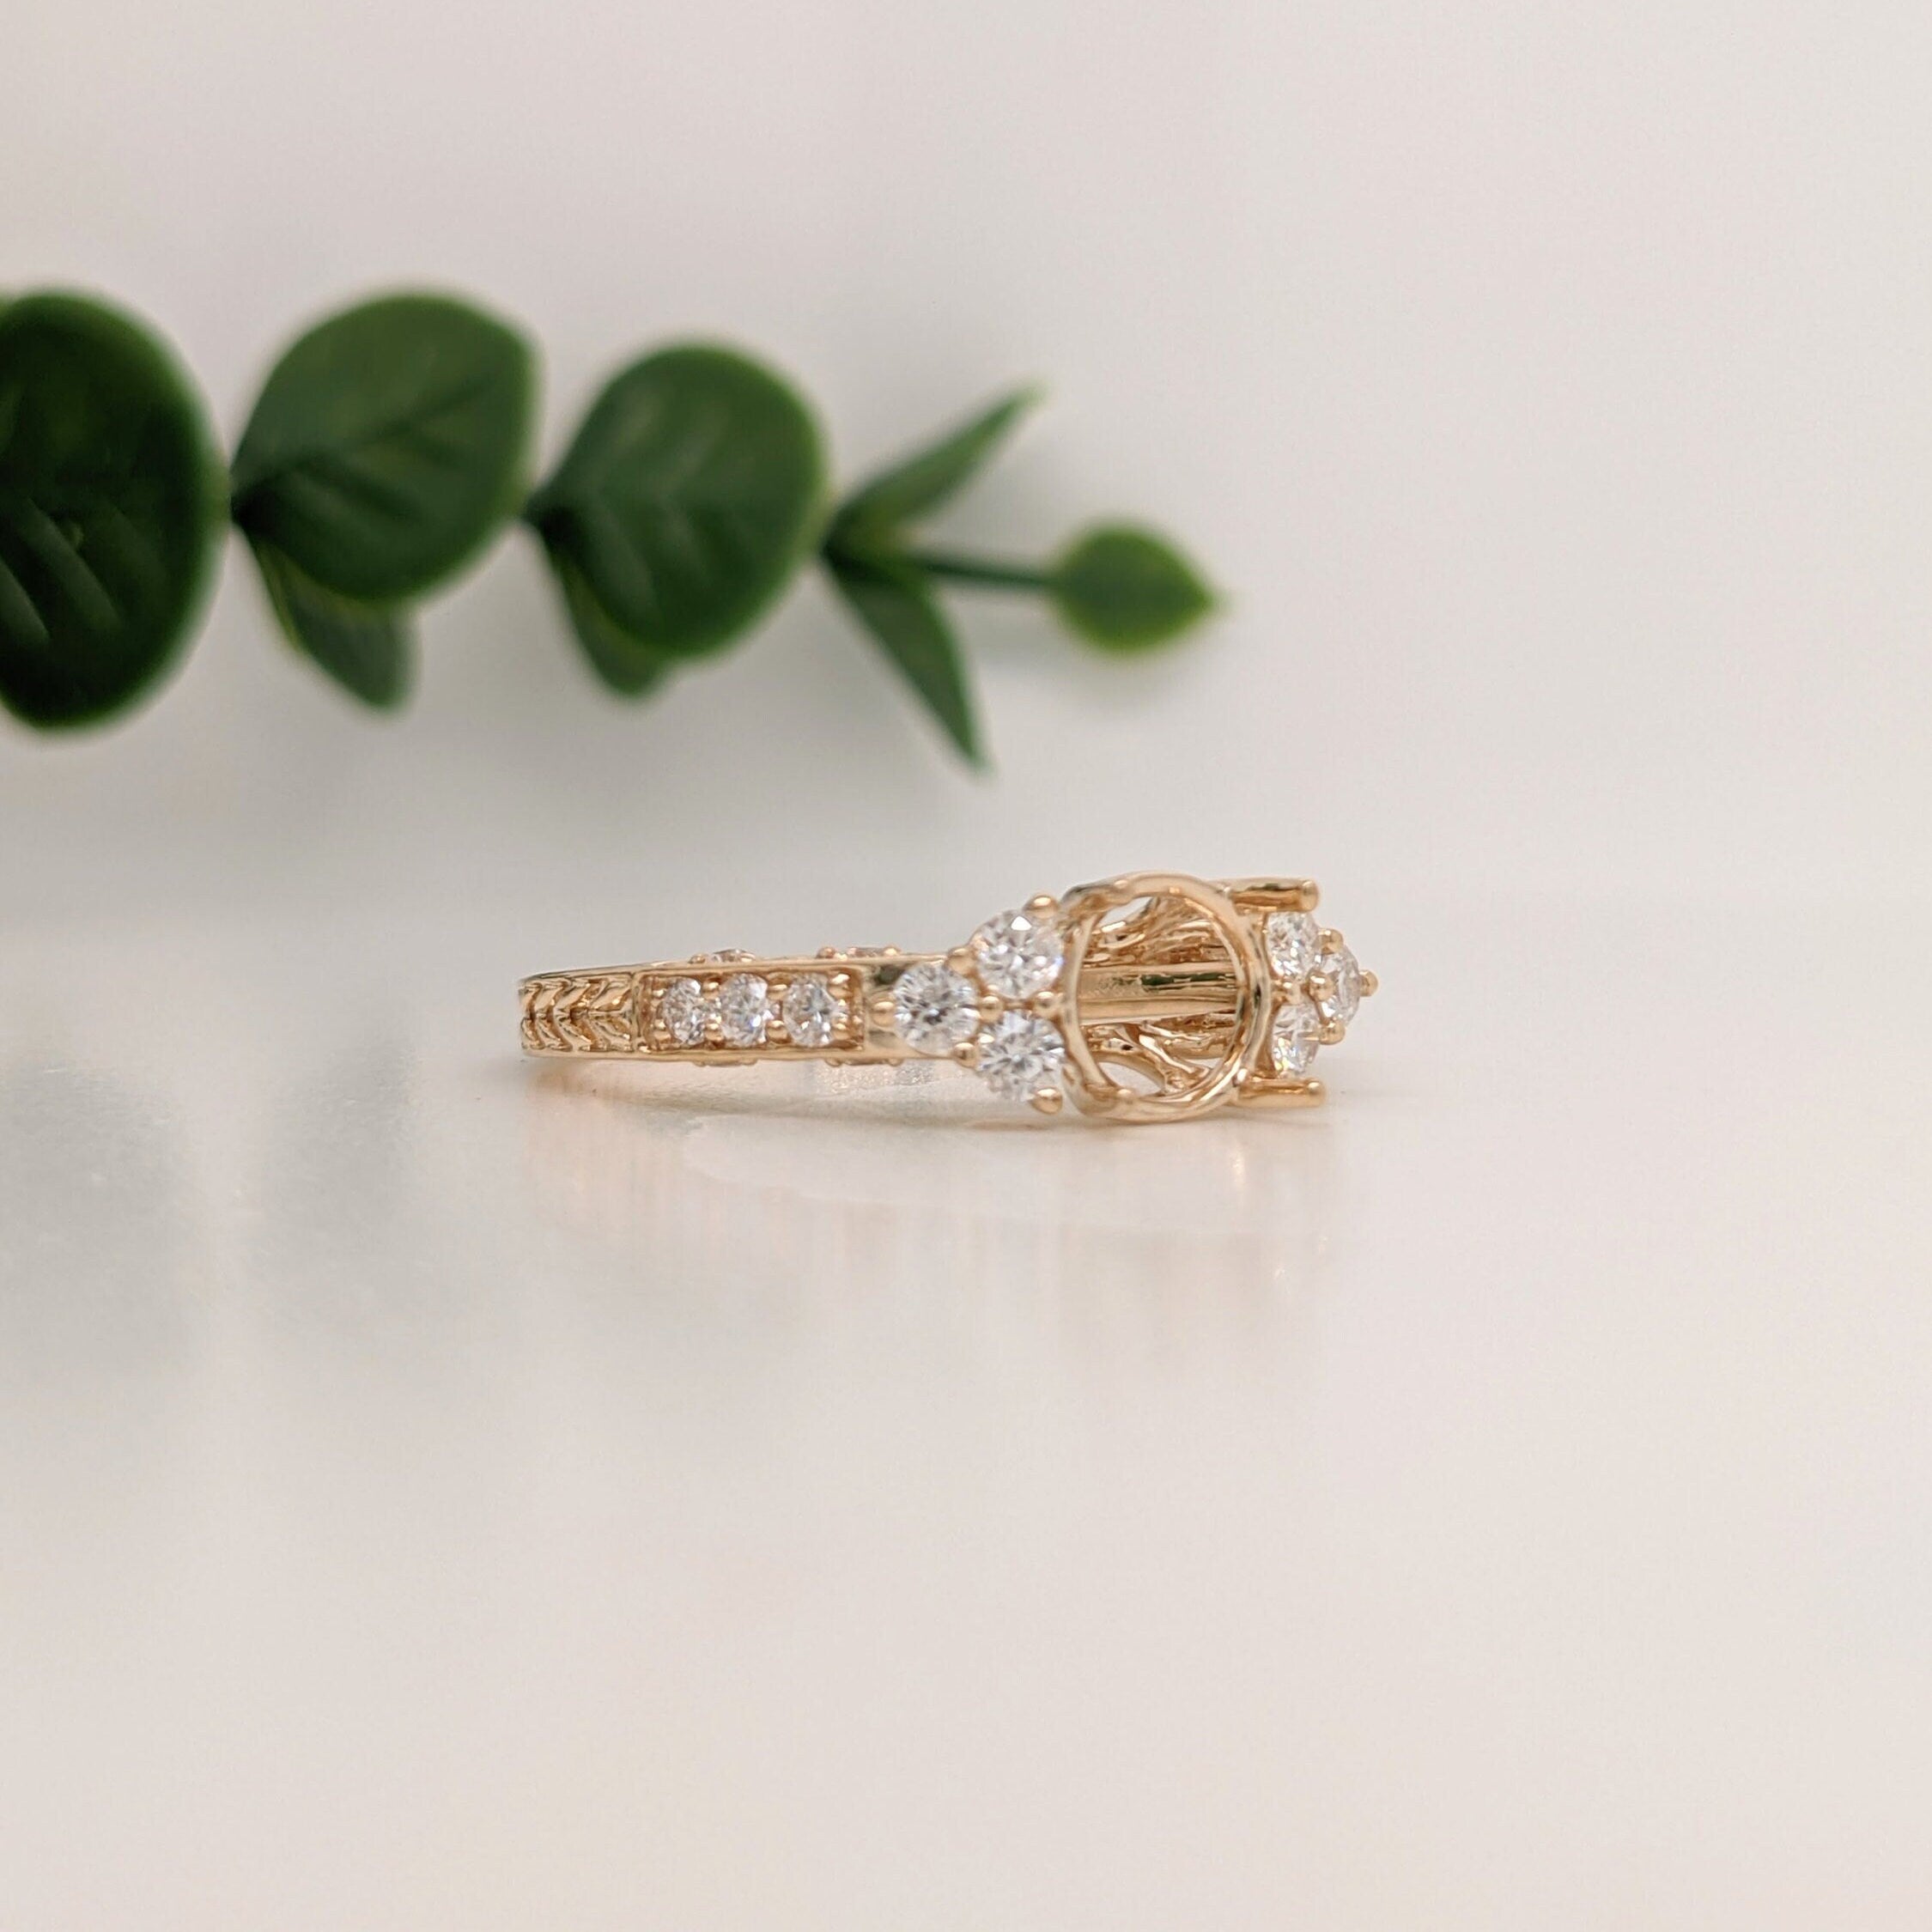 Vintage Inspired Diamond Ring Semi Mount in Solid 14K Gold | Round 6mm + | Textured Shank | Art Deco | Wide Band | Detailed | Customizable